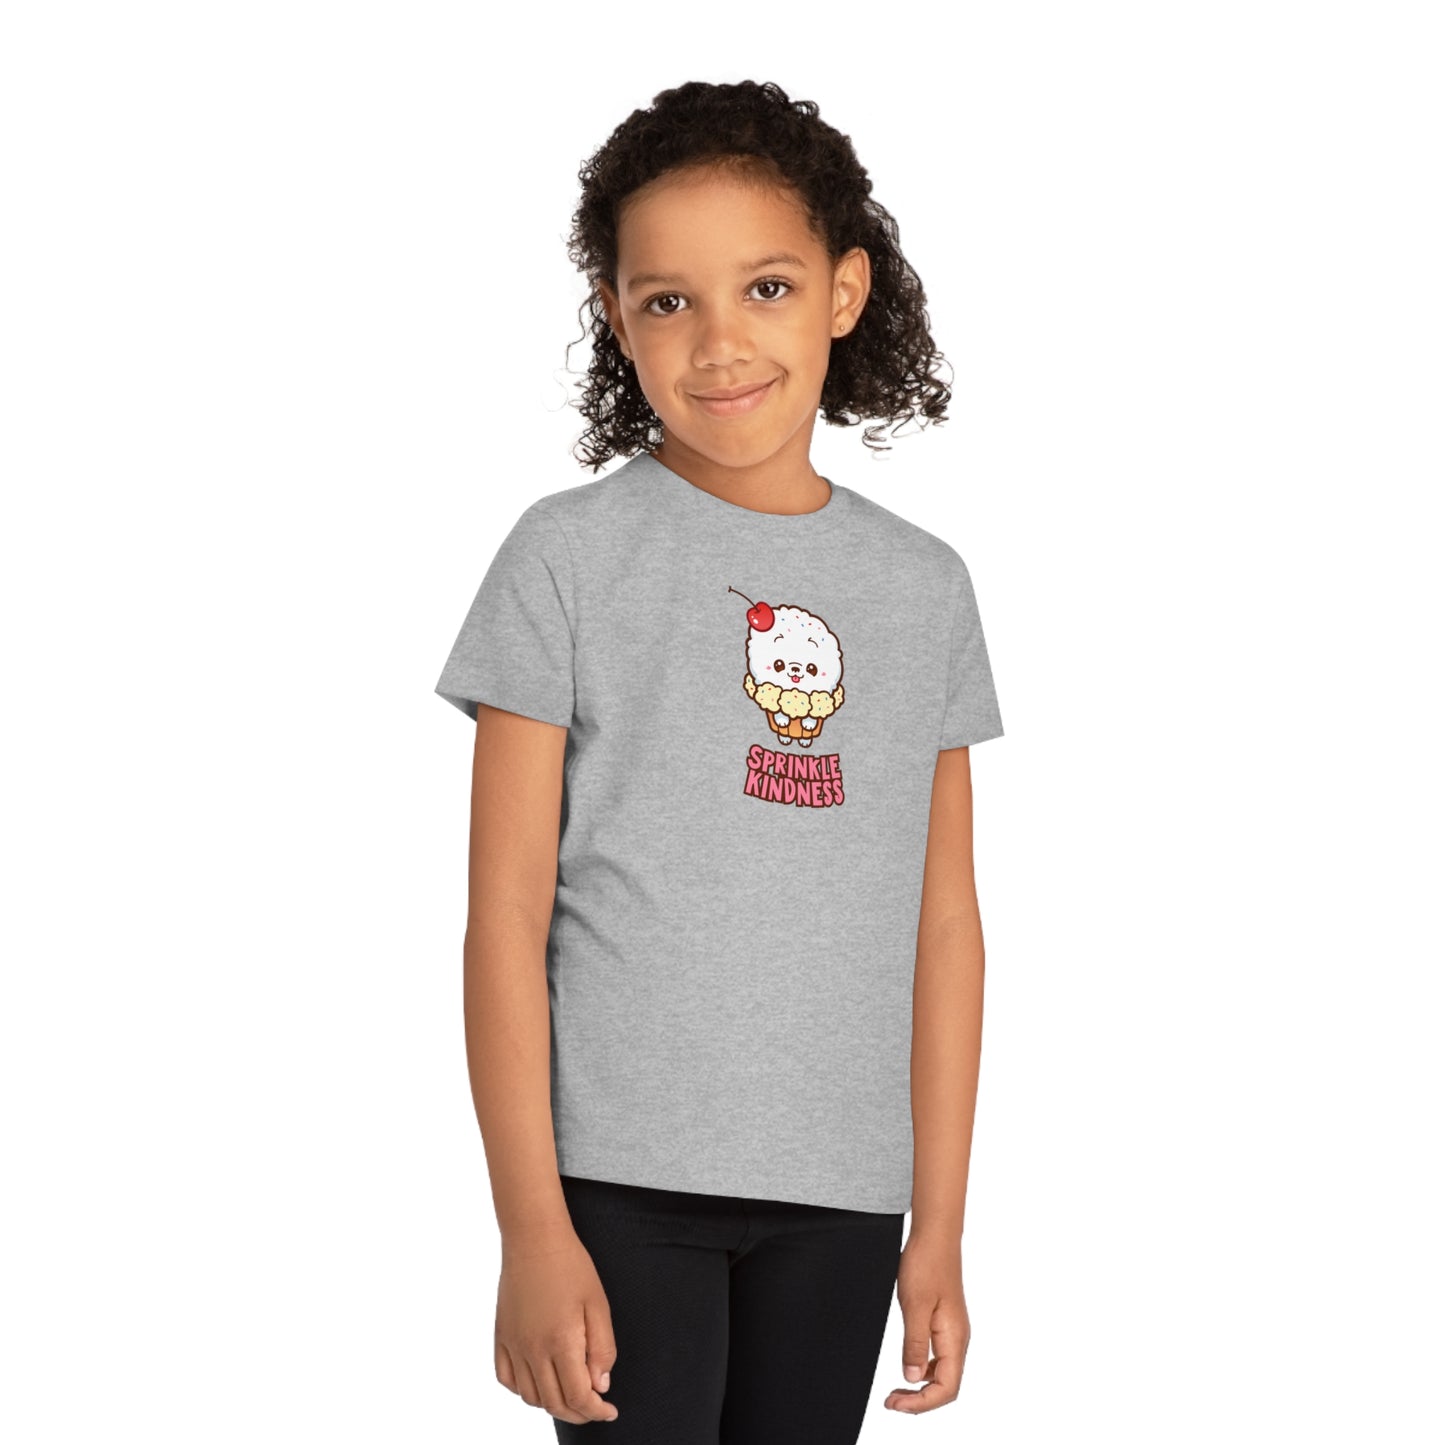 Anti-bullying Shirts for Kids, Children's Eco-friendly Cute T-shirt, Kids Natural Kindness T-shirt, Toddler & Youth Tee, Kids Sprinkle Kindness Tee